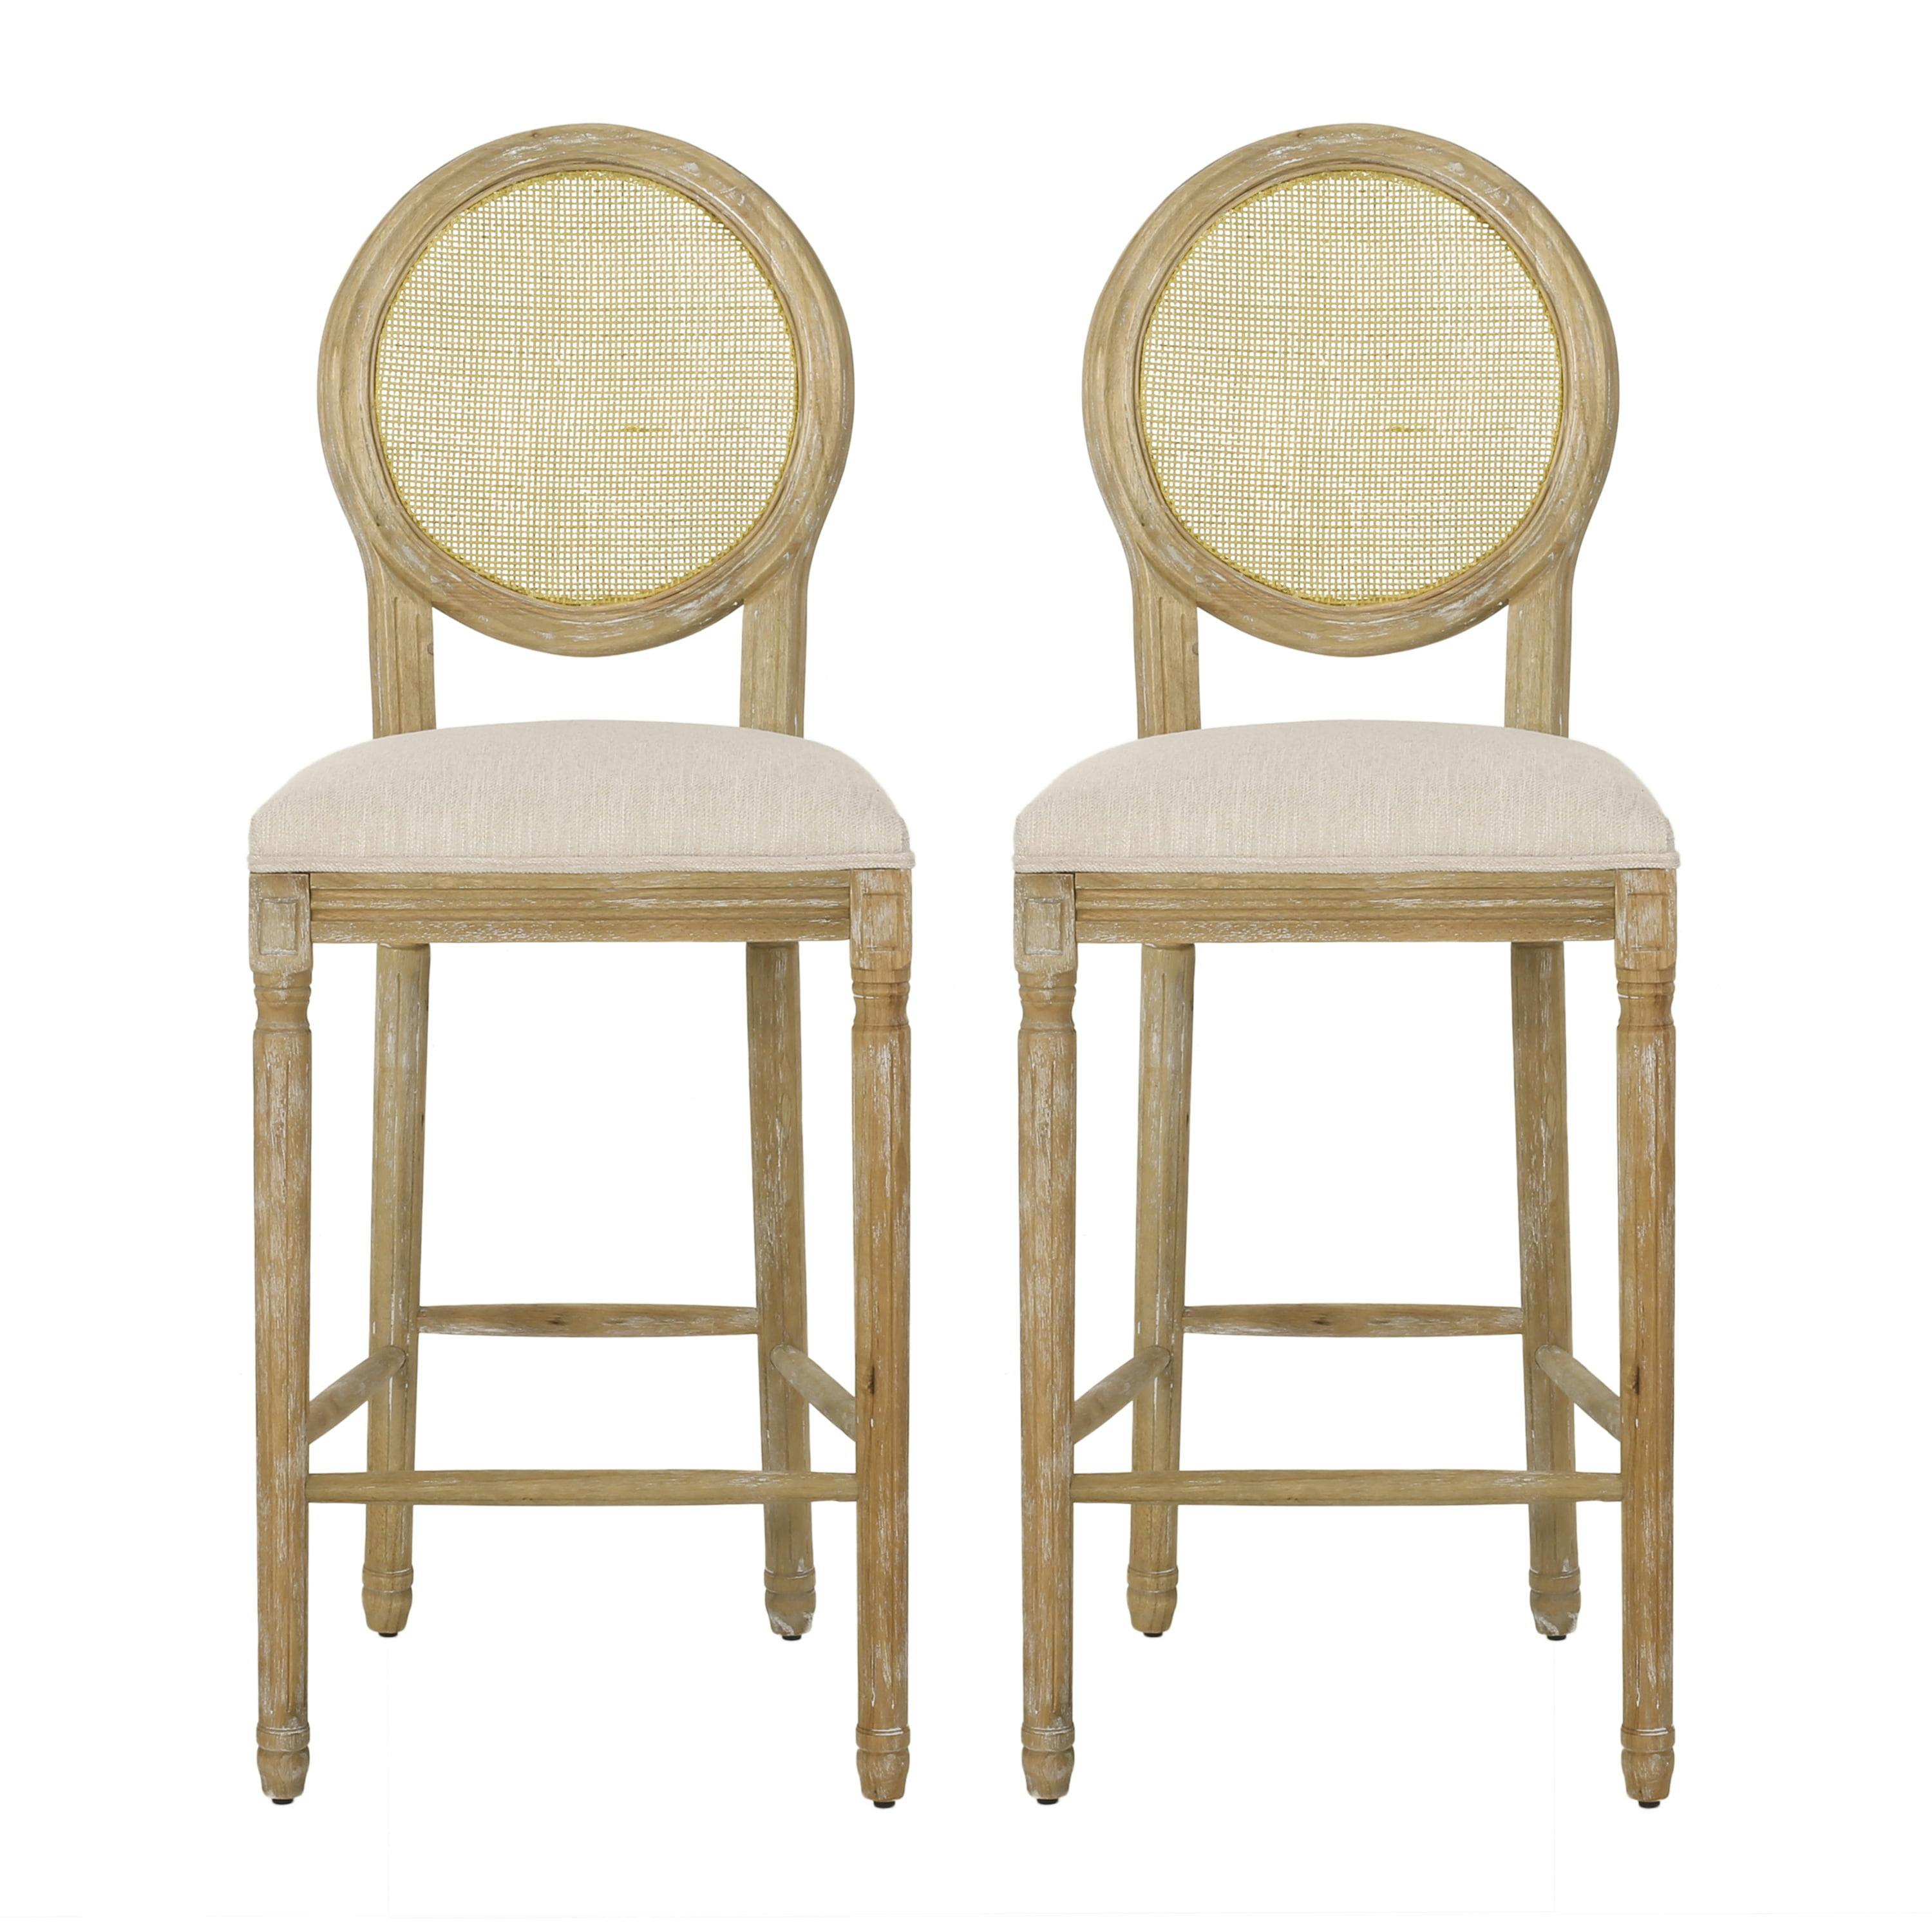 Salton French Country Wicker-Backed Barstools in Natural and Beige, Set of 2